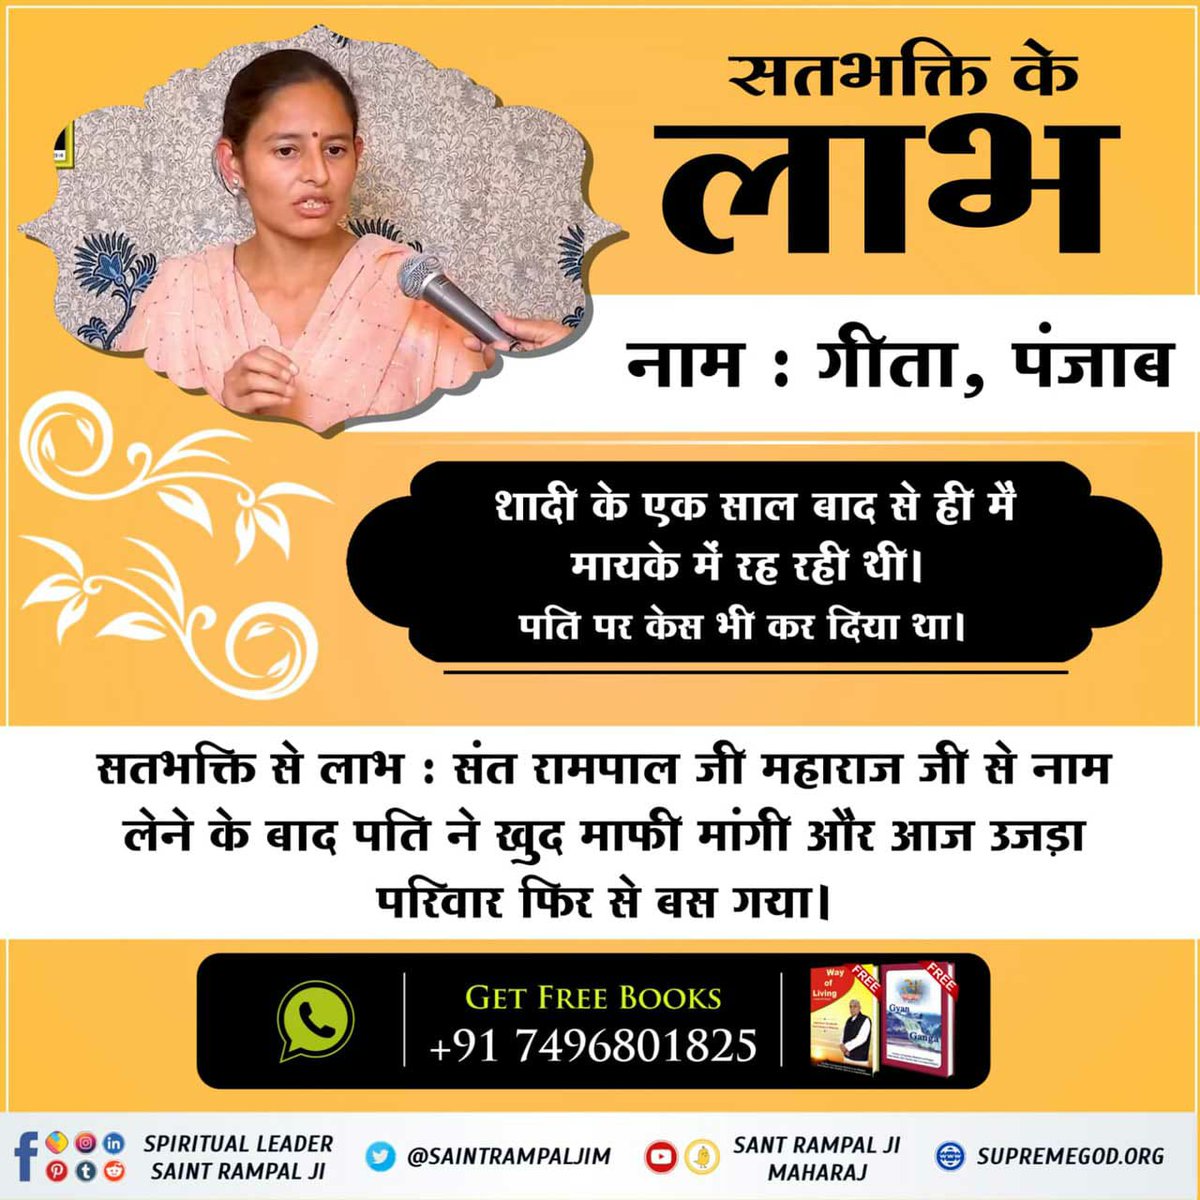 #ऐसे_सुख_देता_है_भगवान By doing Satbhakti, even the desolate family settles down and the whole family lives a life of happiness. The journey of life is easily decided because the path of life is cleared. #GodNightWednesday